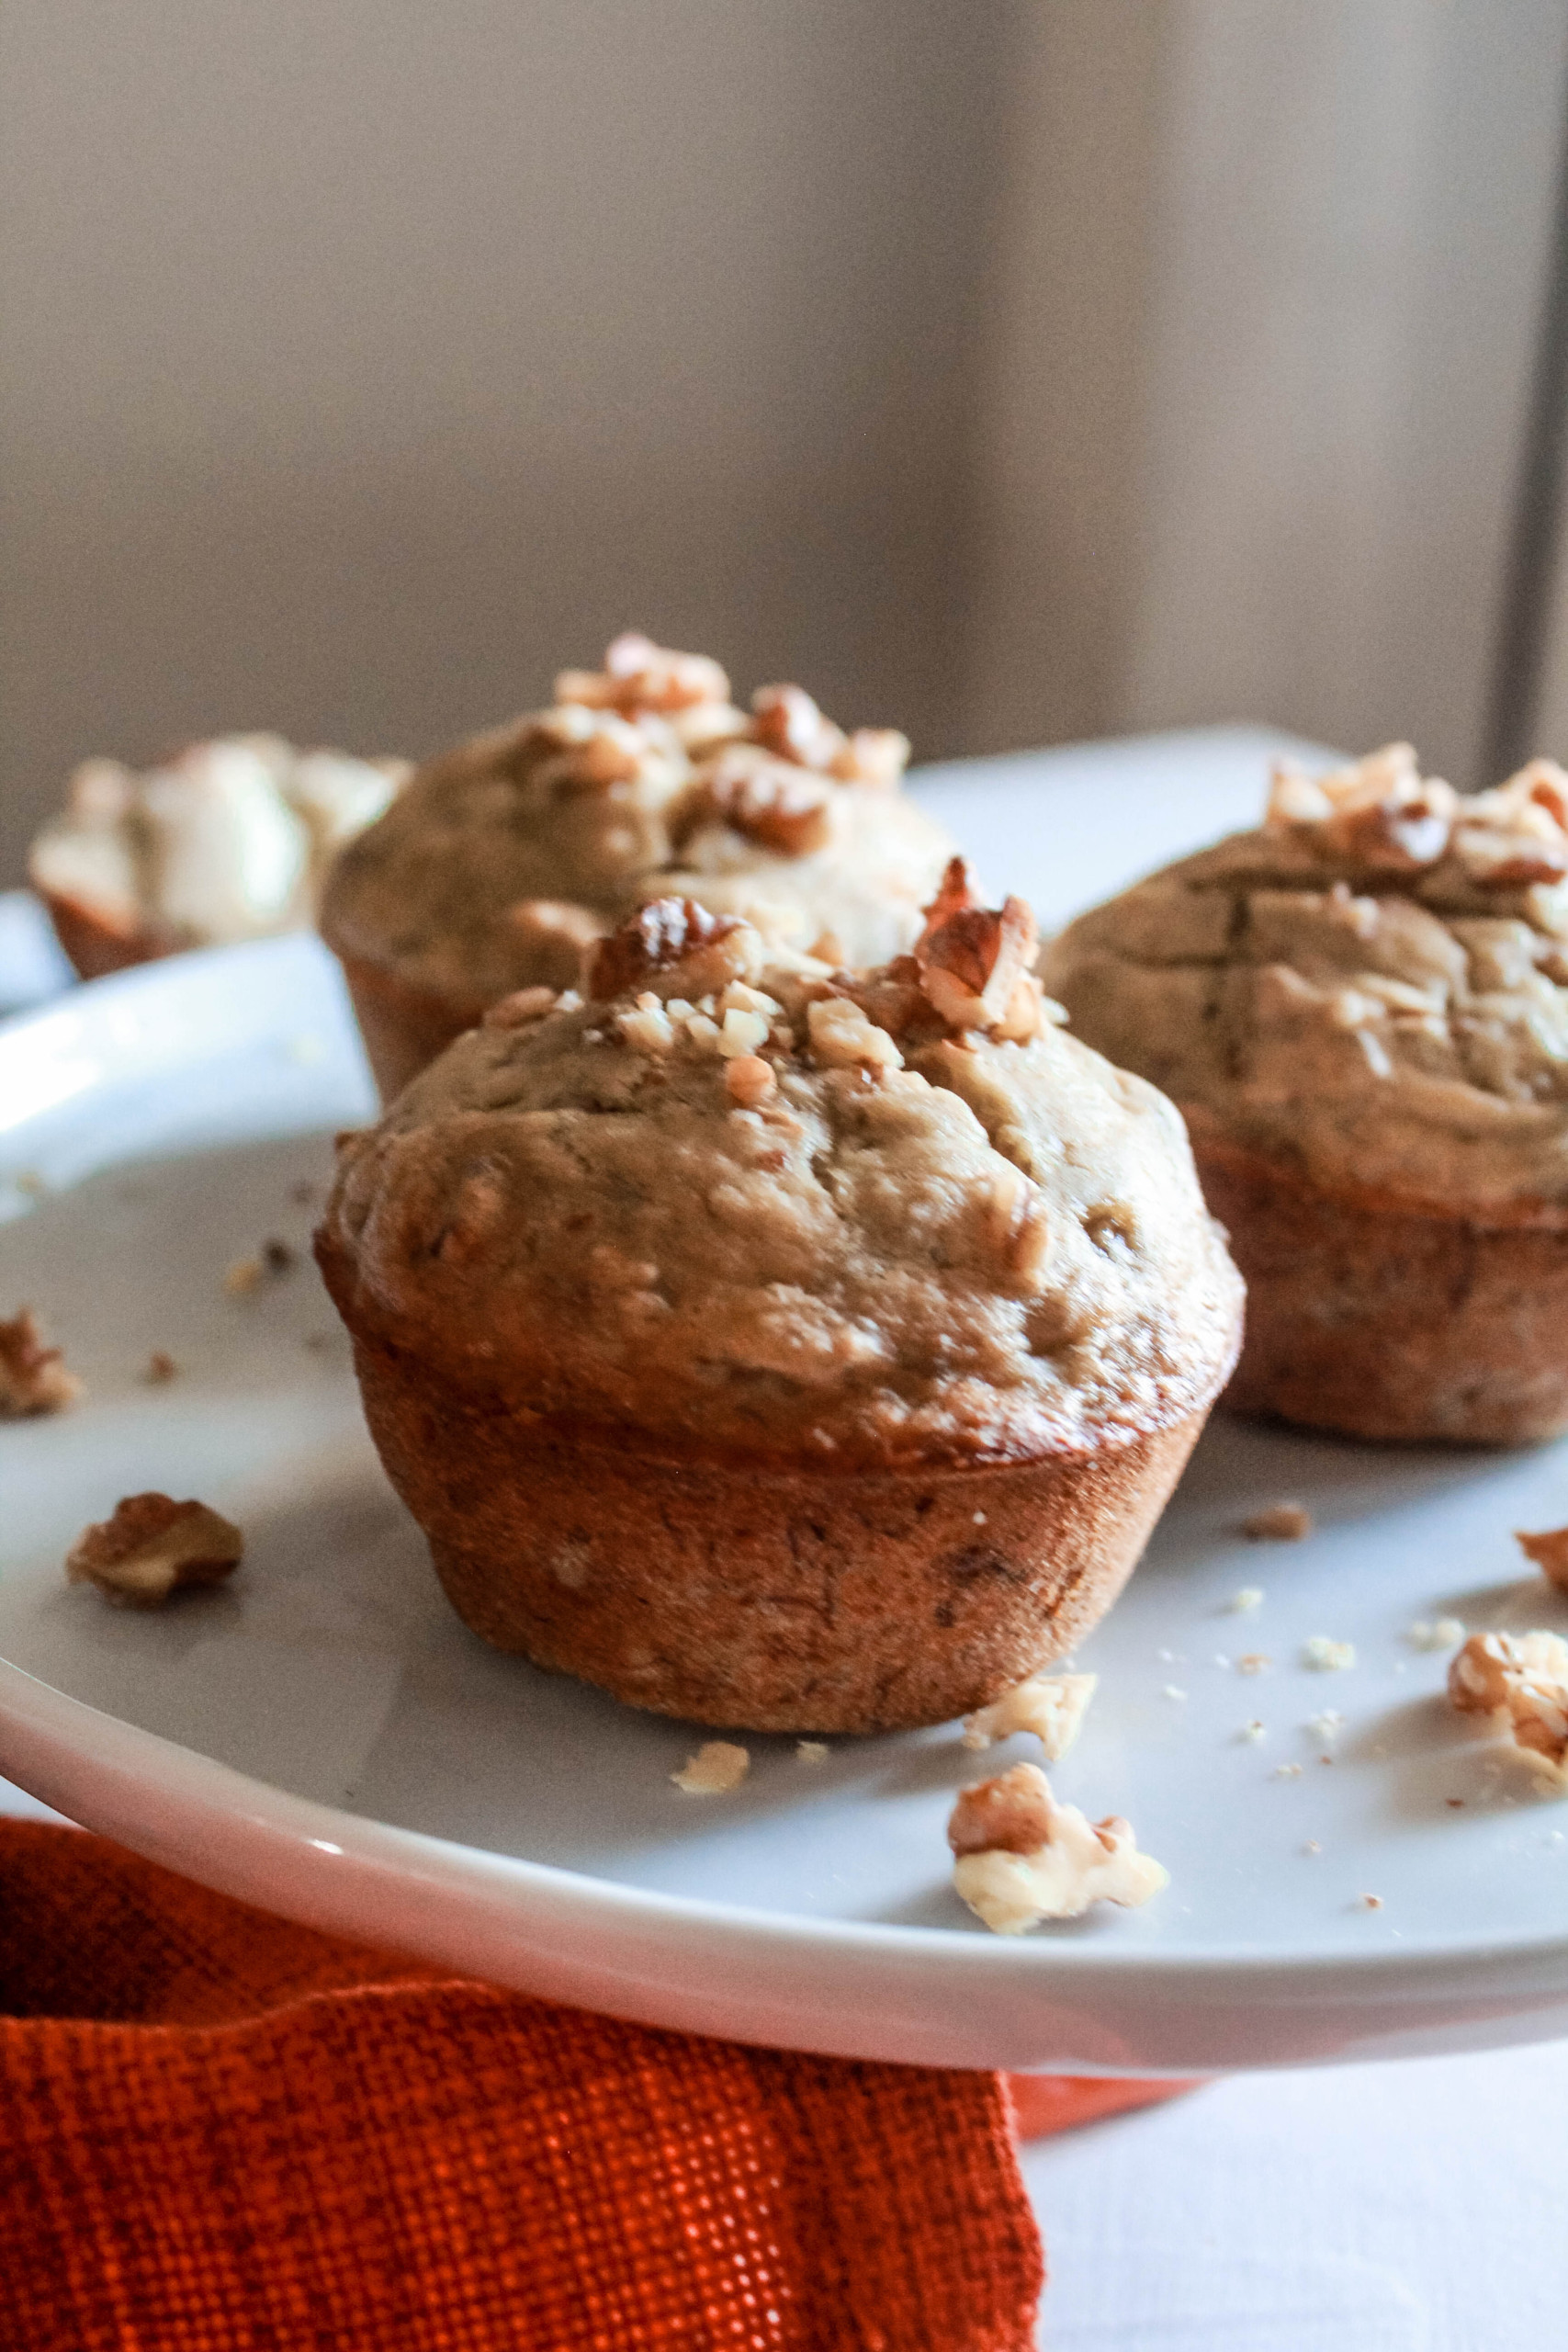 These delicious breakfast muffins require only 8-ingredients and are ready in under 30 minutes! They’re moist, fluffy, easy to make and are full of fall flavors! #muffins #veganrecipe #veganbaking